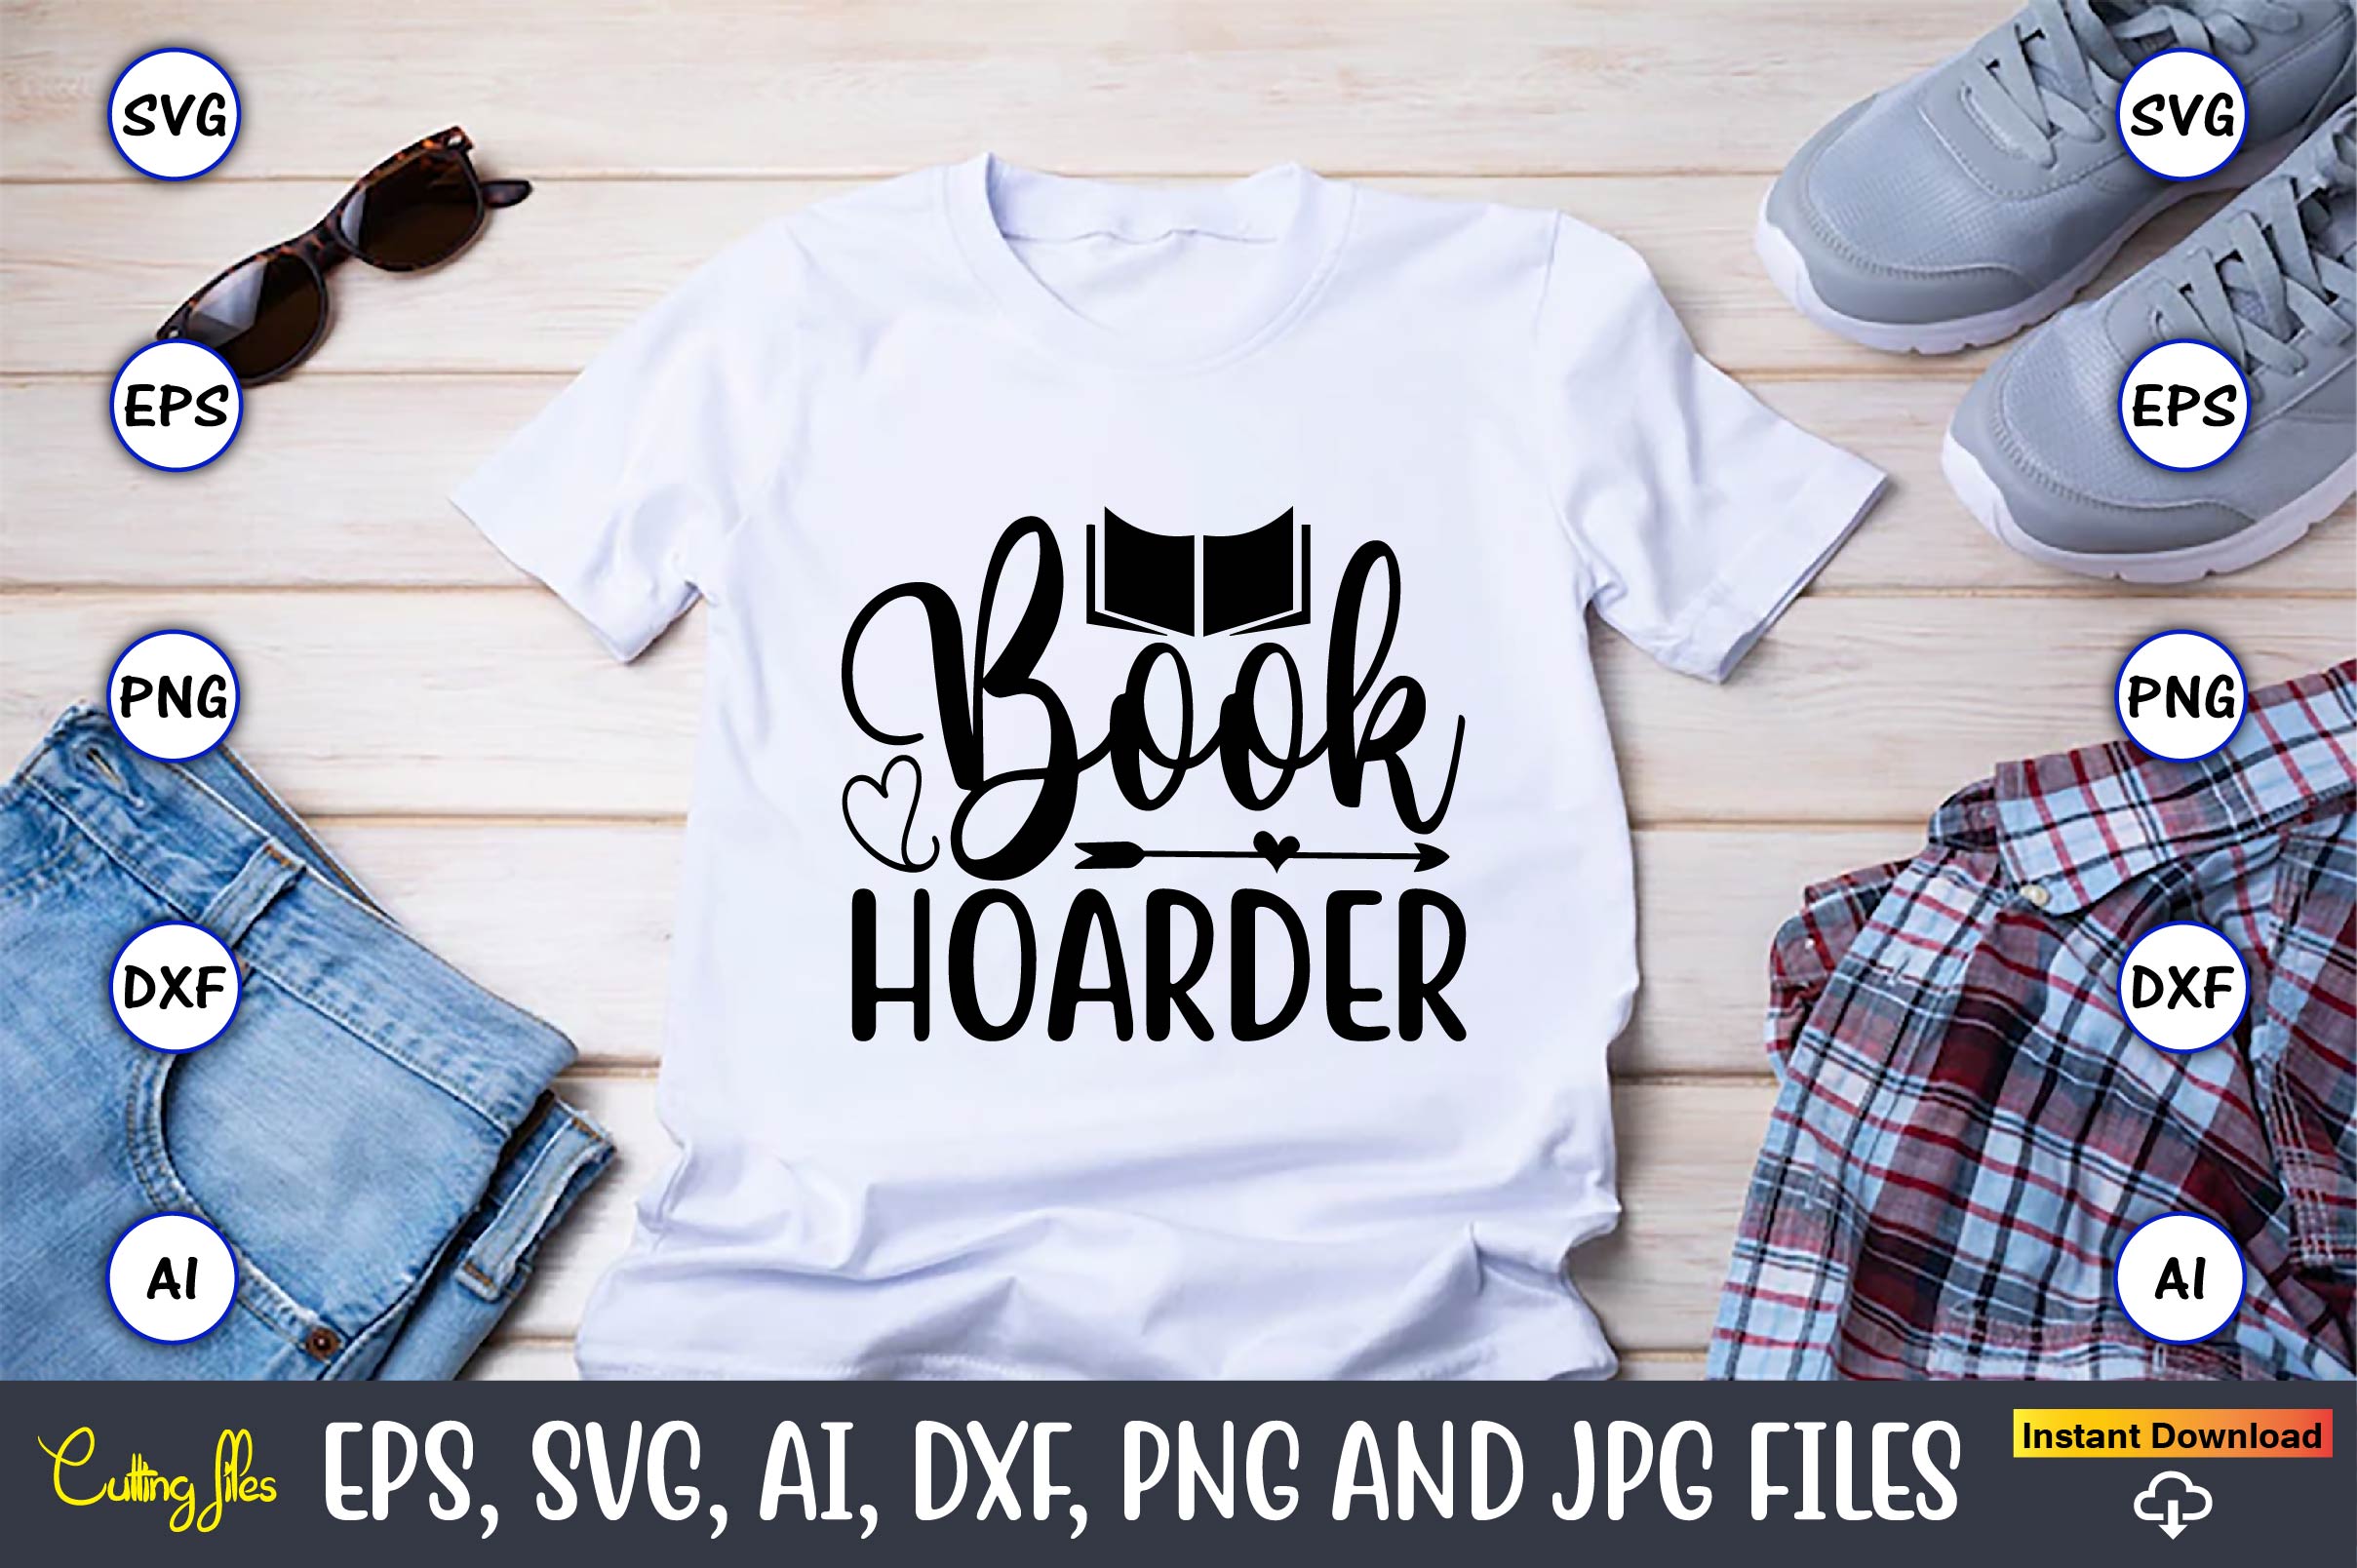 Image of a white T-shirt with a unique inscription Book hoarder.